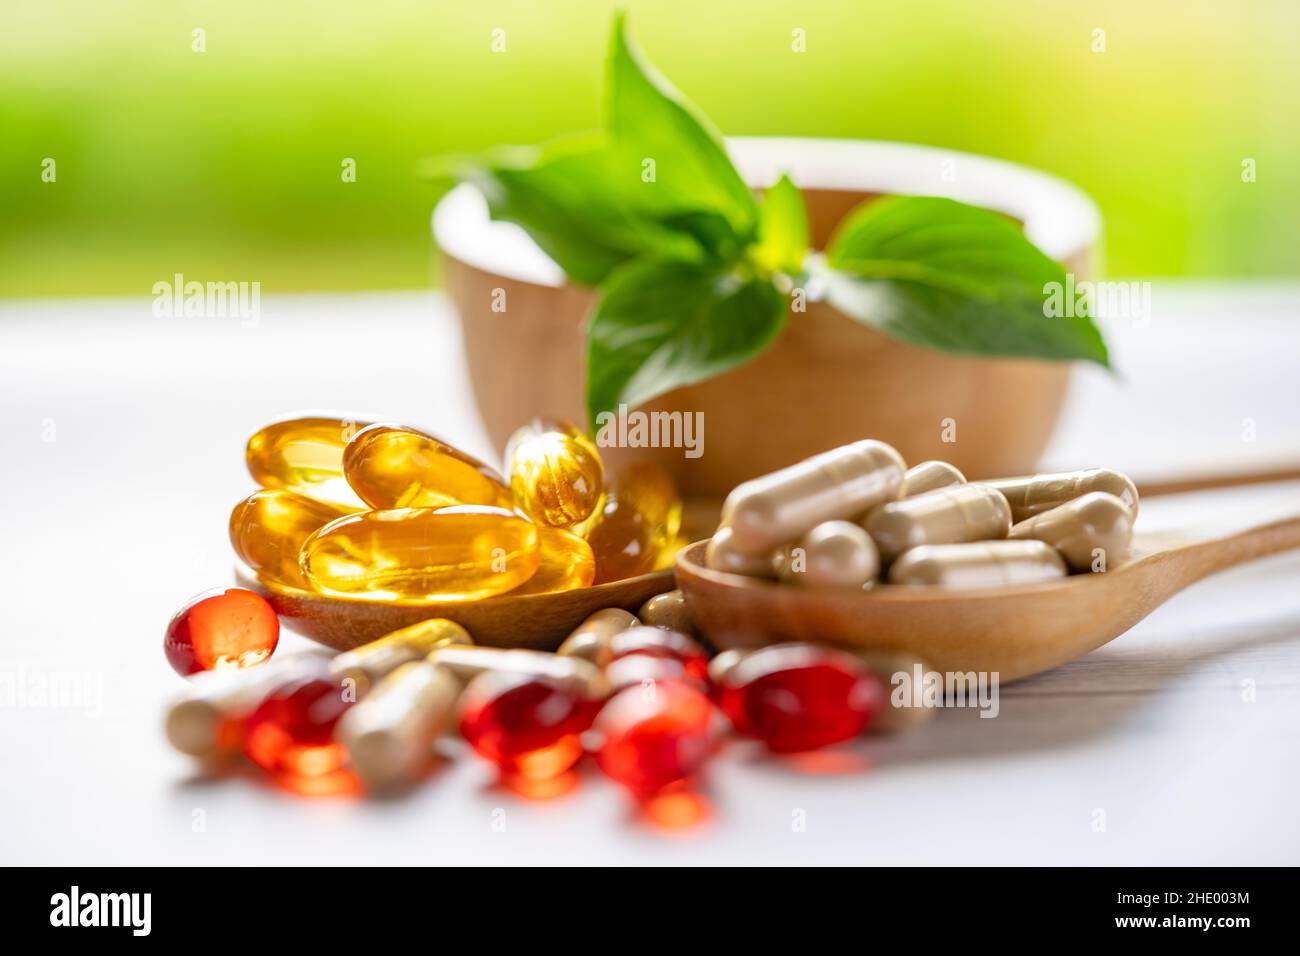 Alternative medicine nature herbal organic capsule, drug with herbs leaf natural supplements for healthy good life. Stock Photo